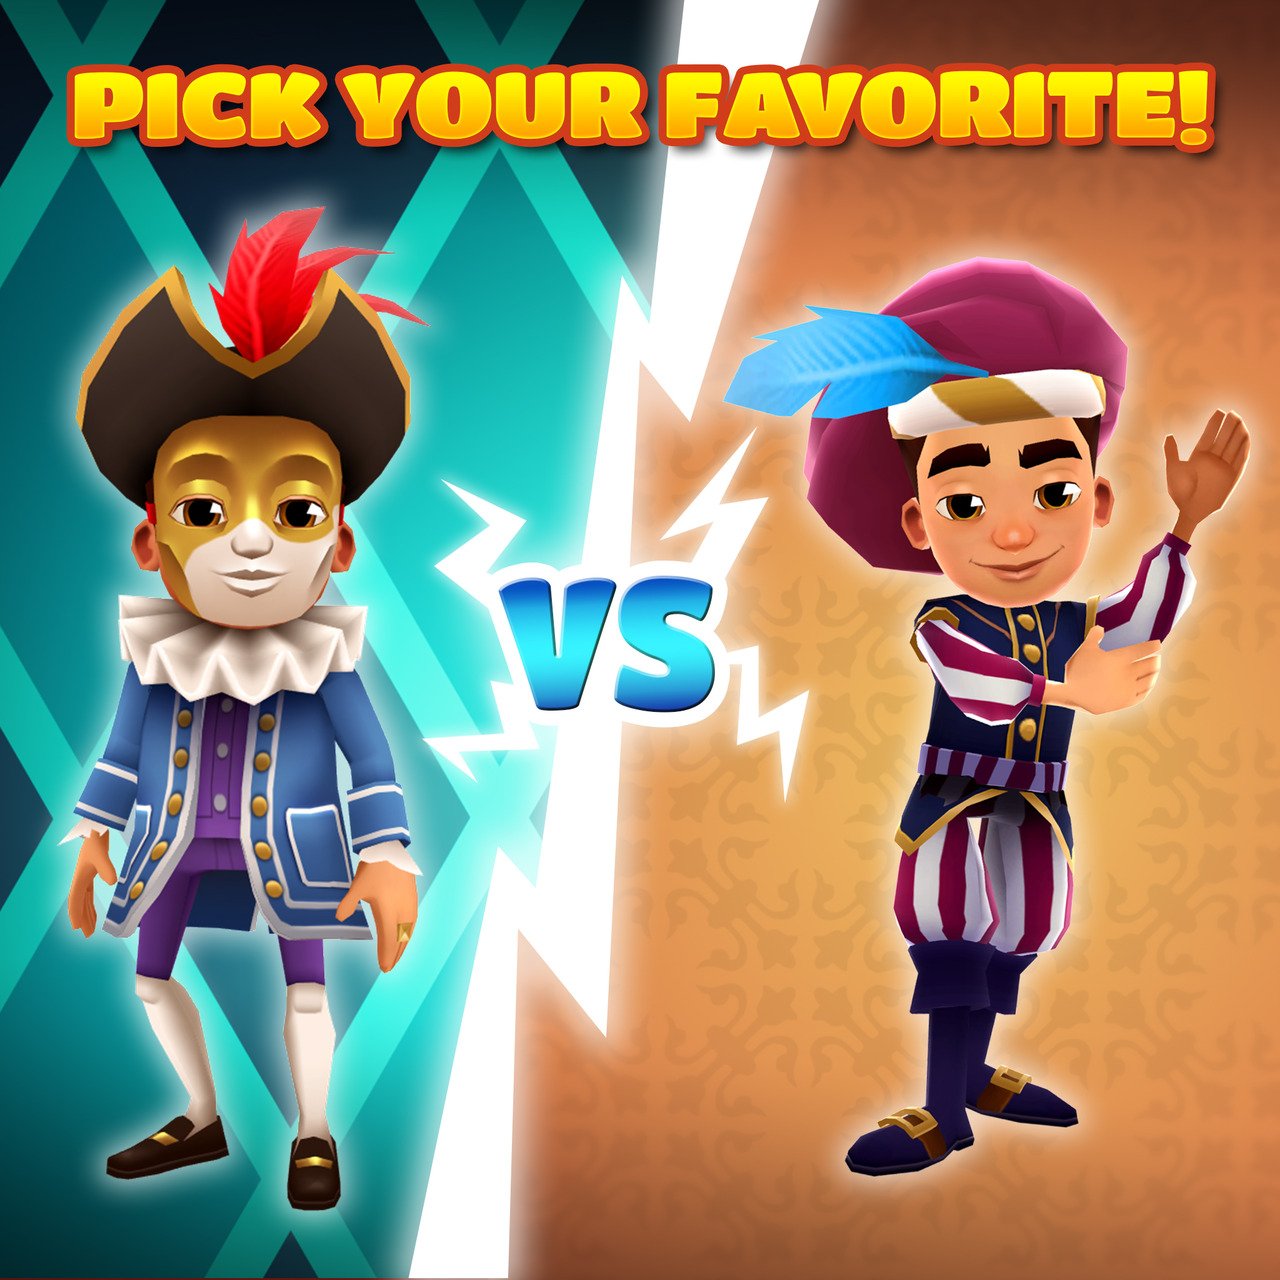 Which outfit should I get : r/subwaysurfers